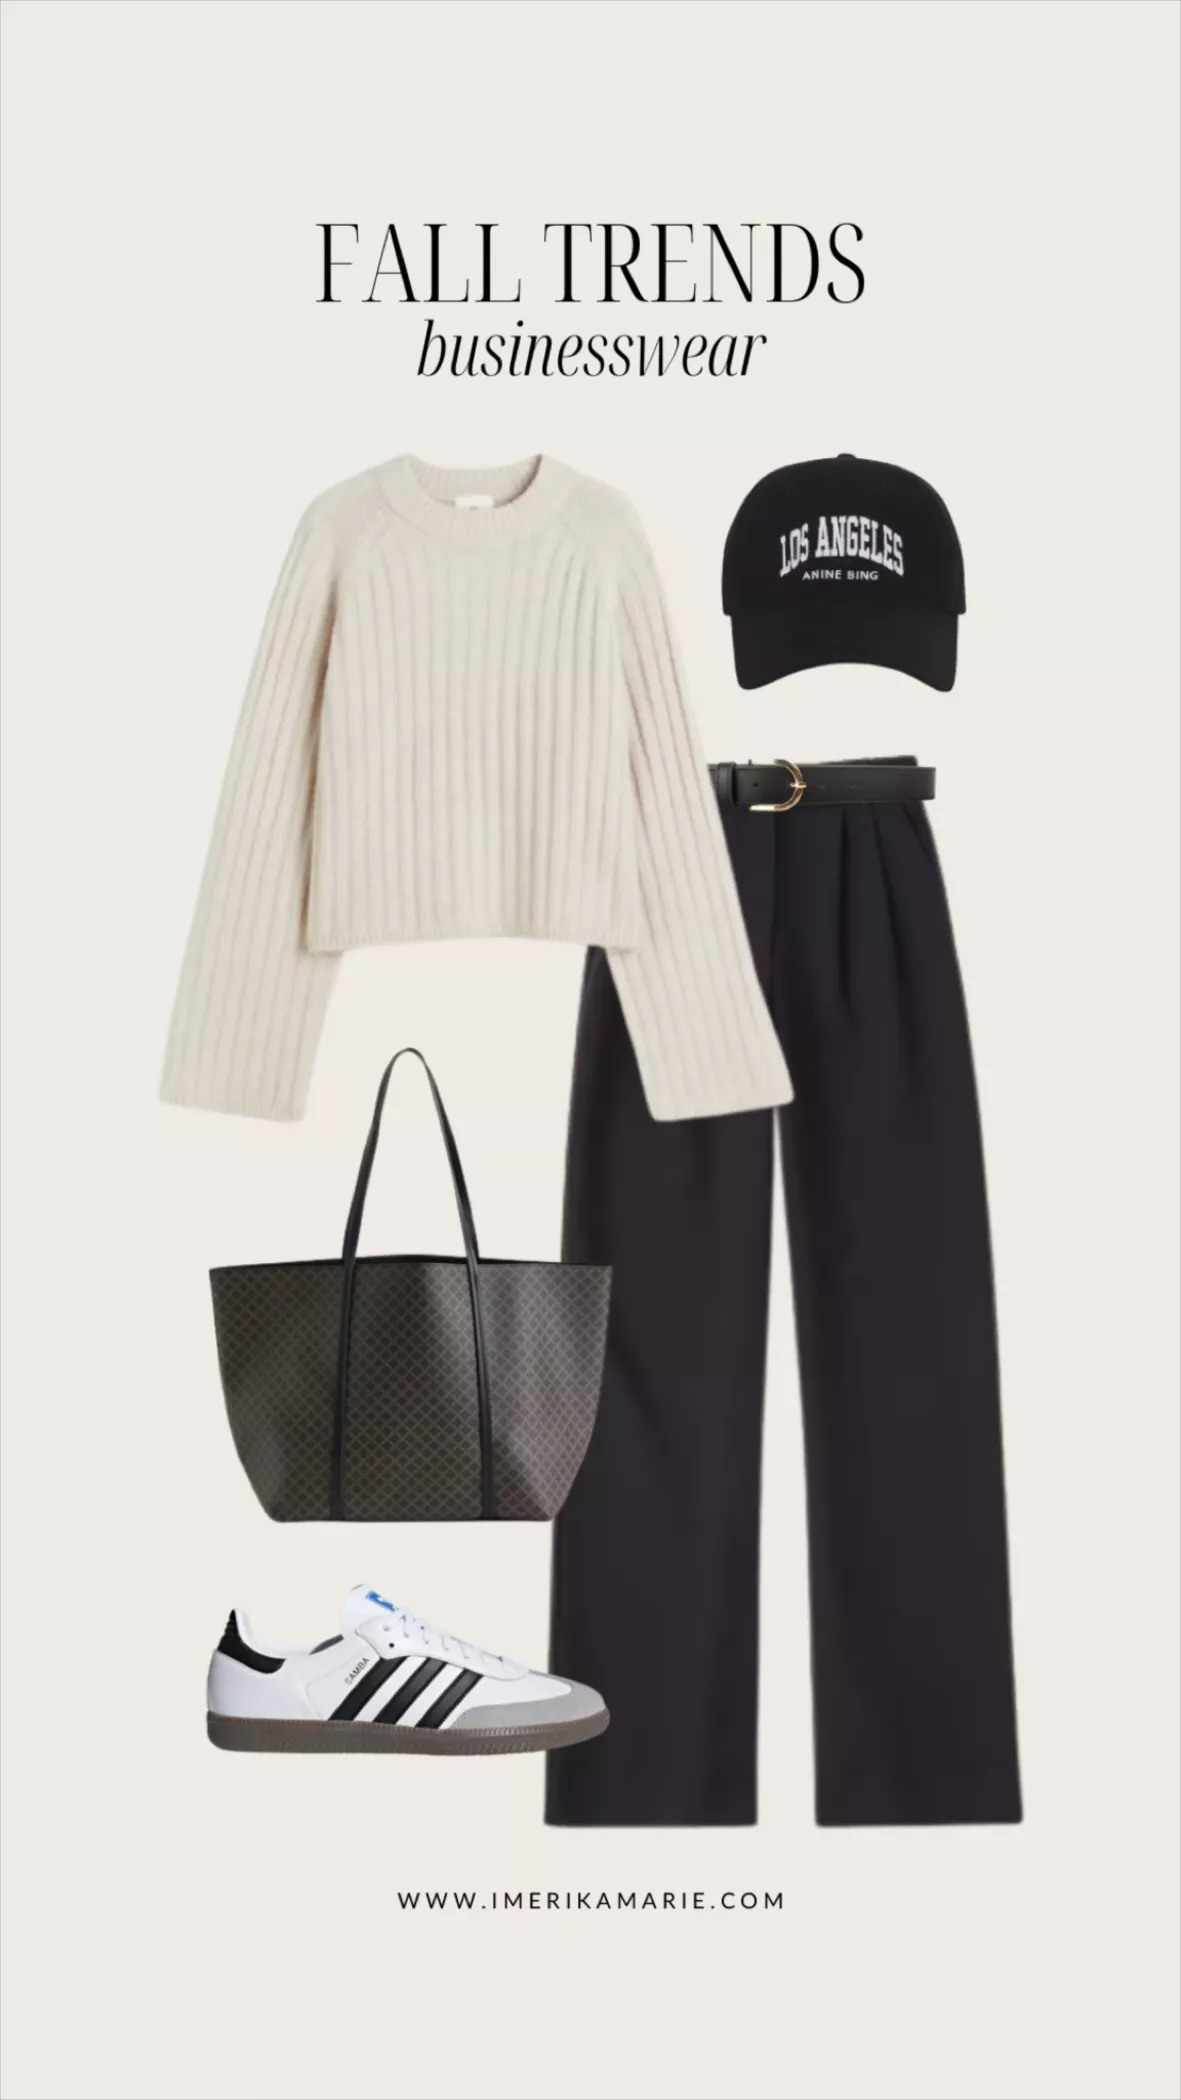 IT Trends: How to Style an Anine Bing Sweatshirt this Fall